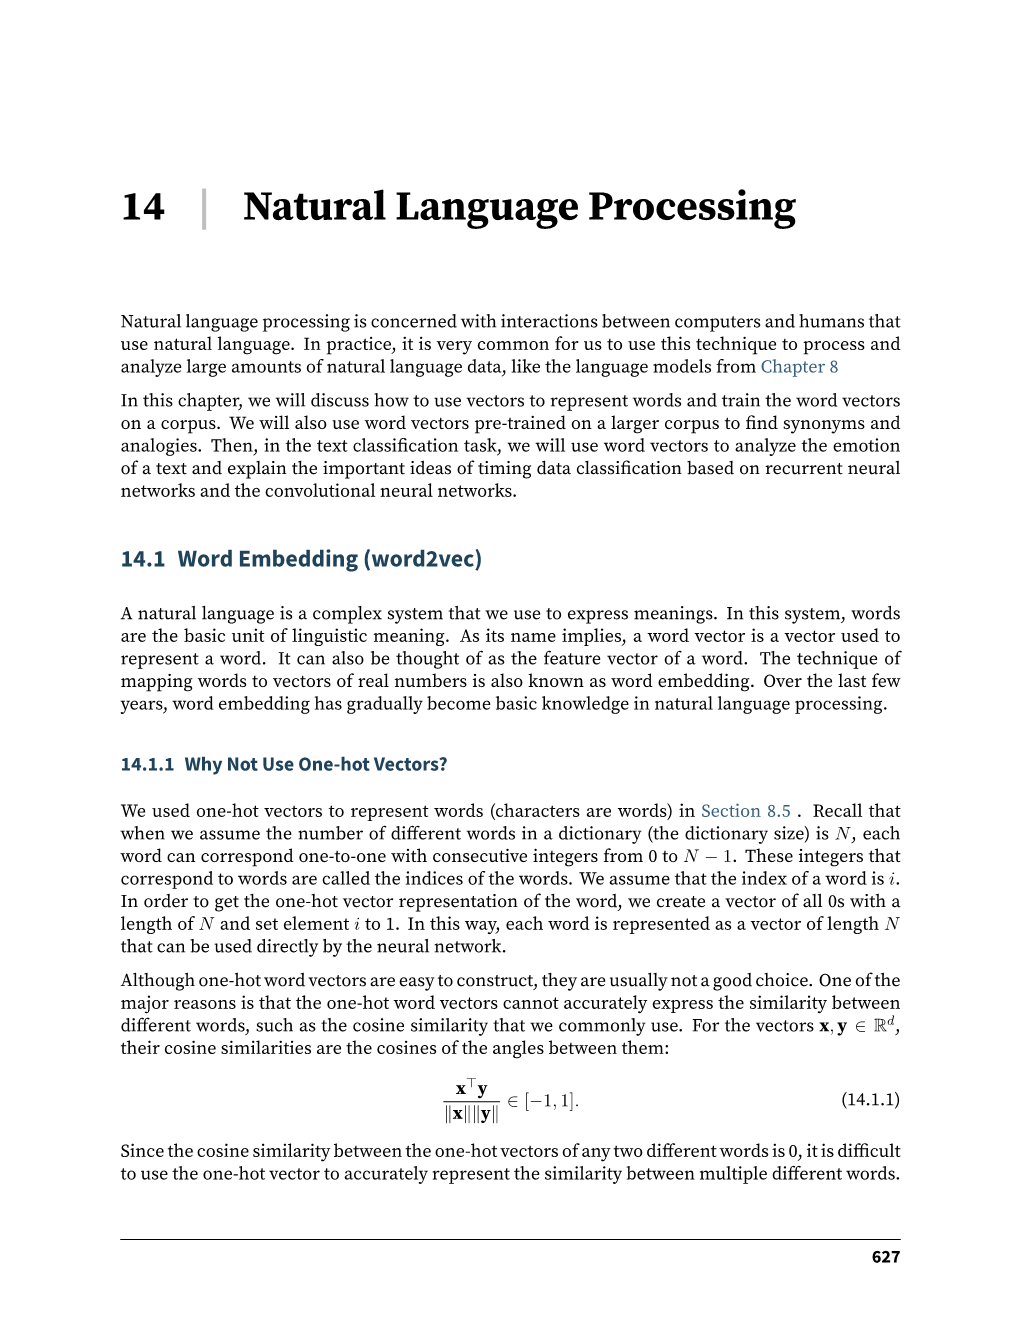 NLP), the Central Target Word Vector in the Skip-Gram Model Is Generally Used As the Representation Vector of a Word